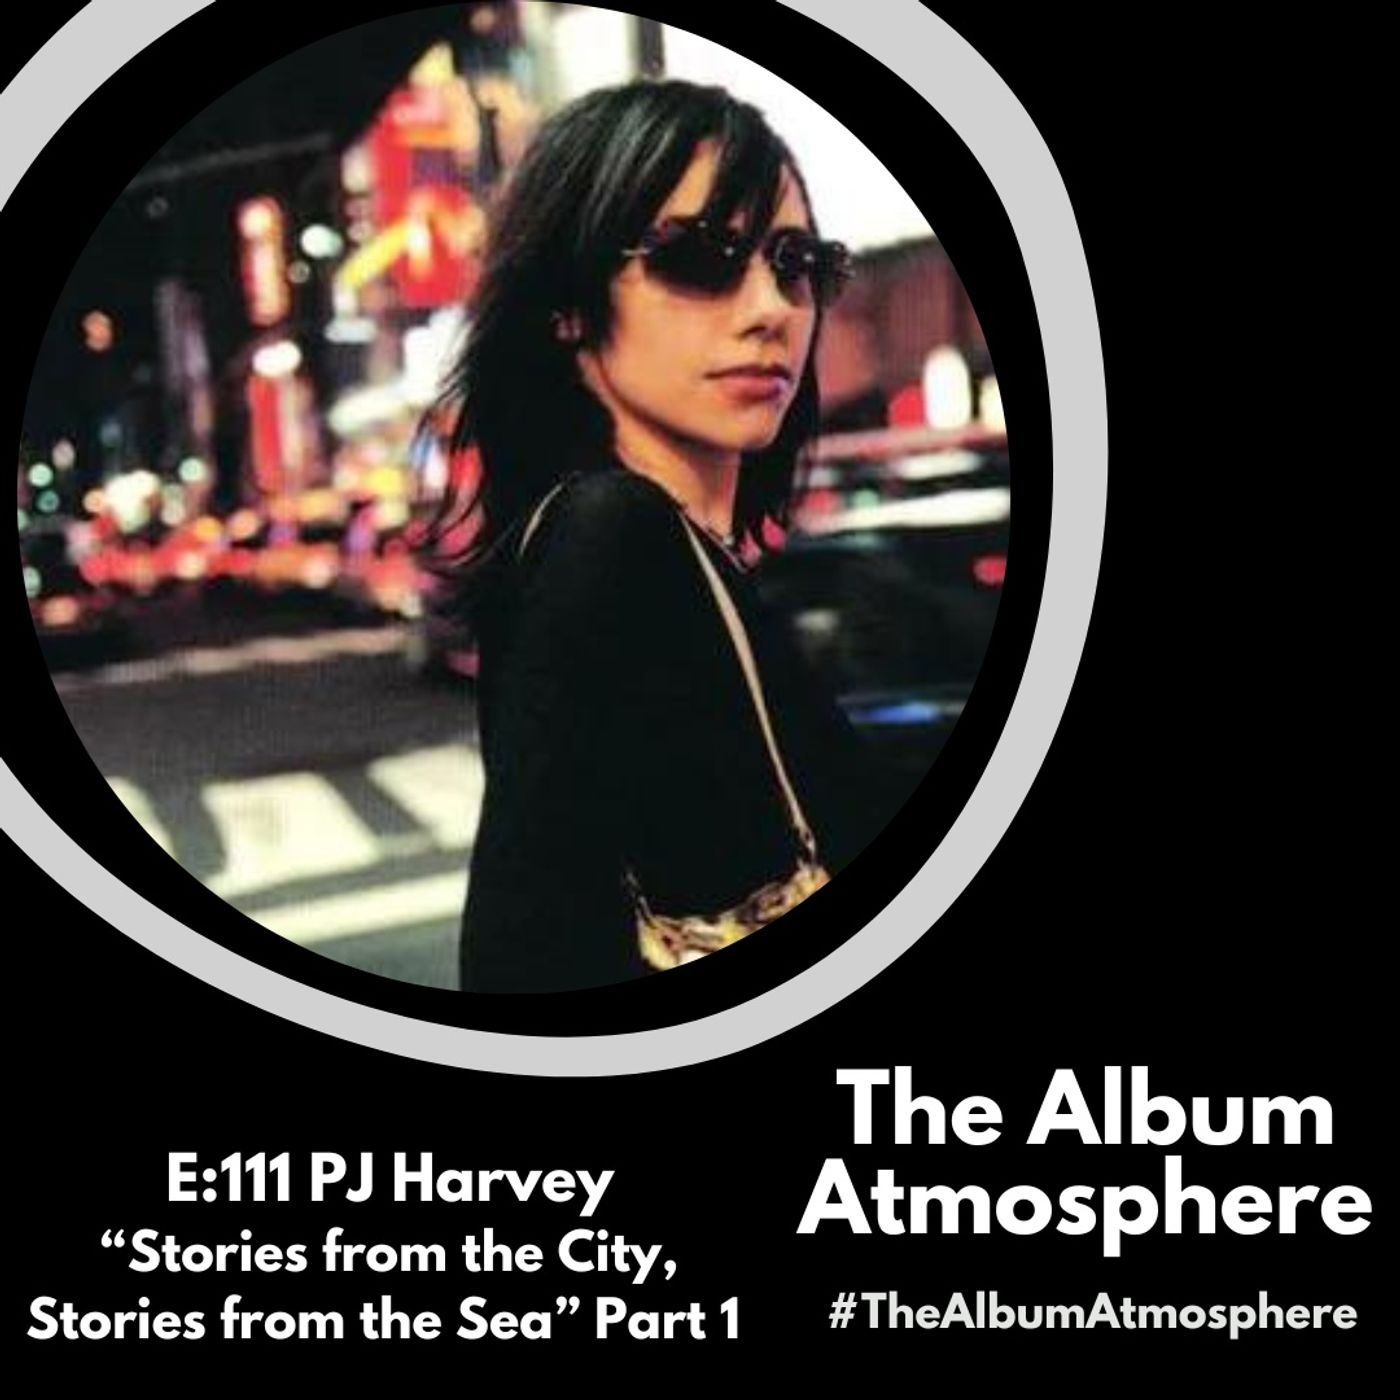 E:111 - PJ Harvey - "Stories from the City, Stories from the Sea" Part 1